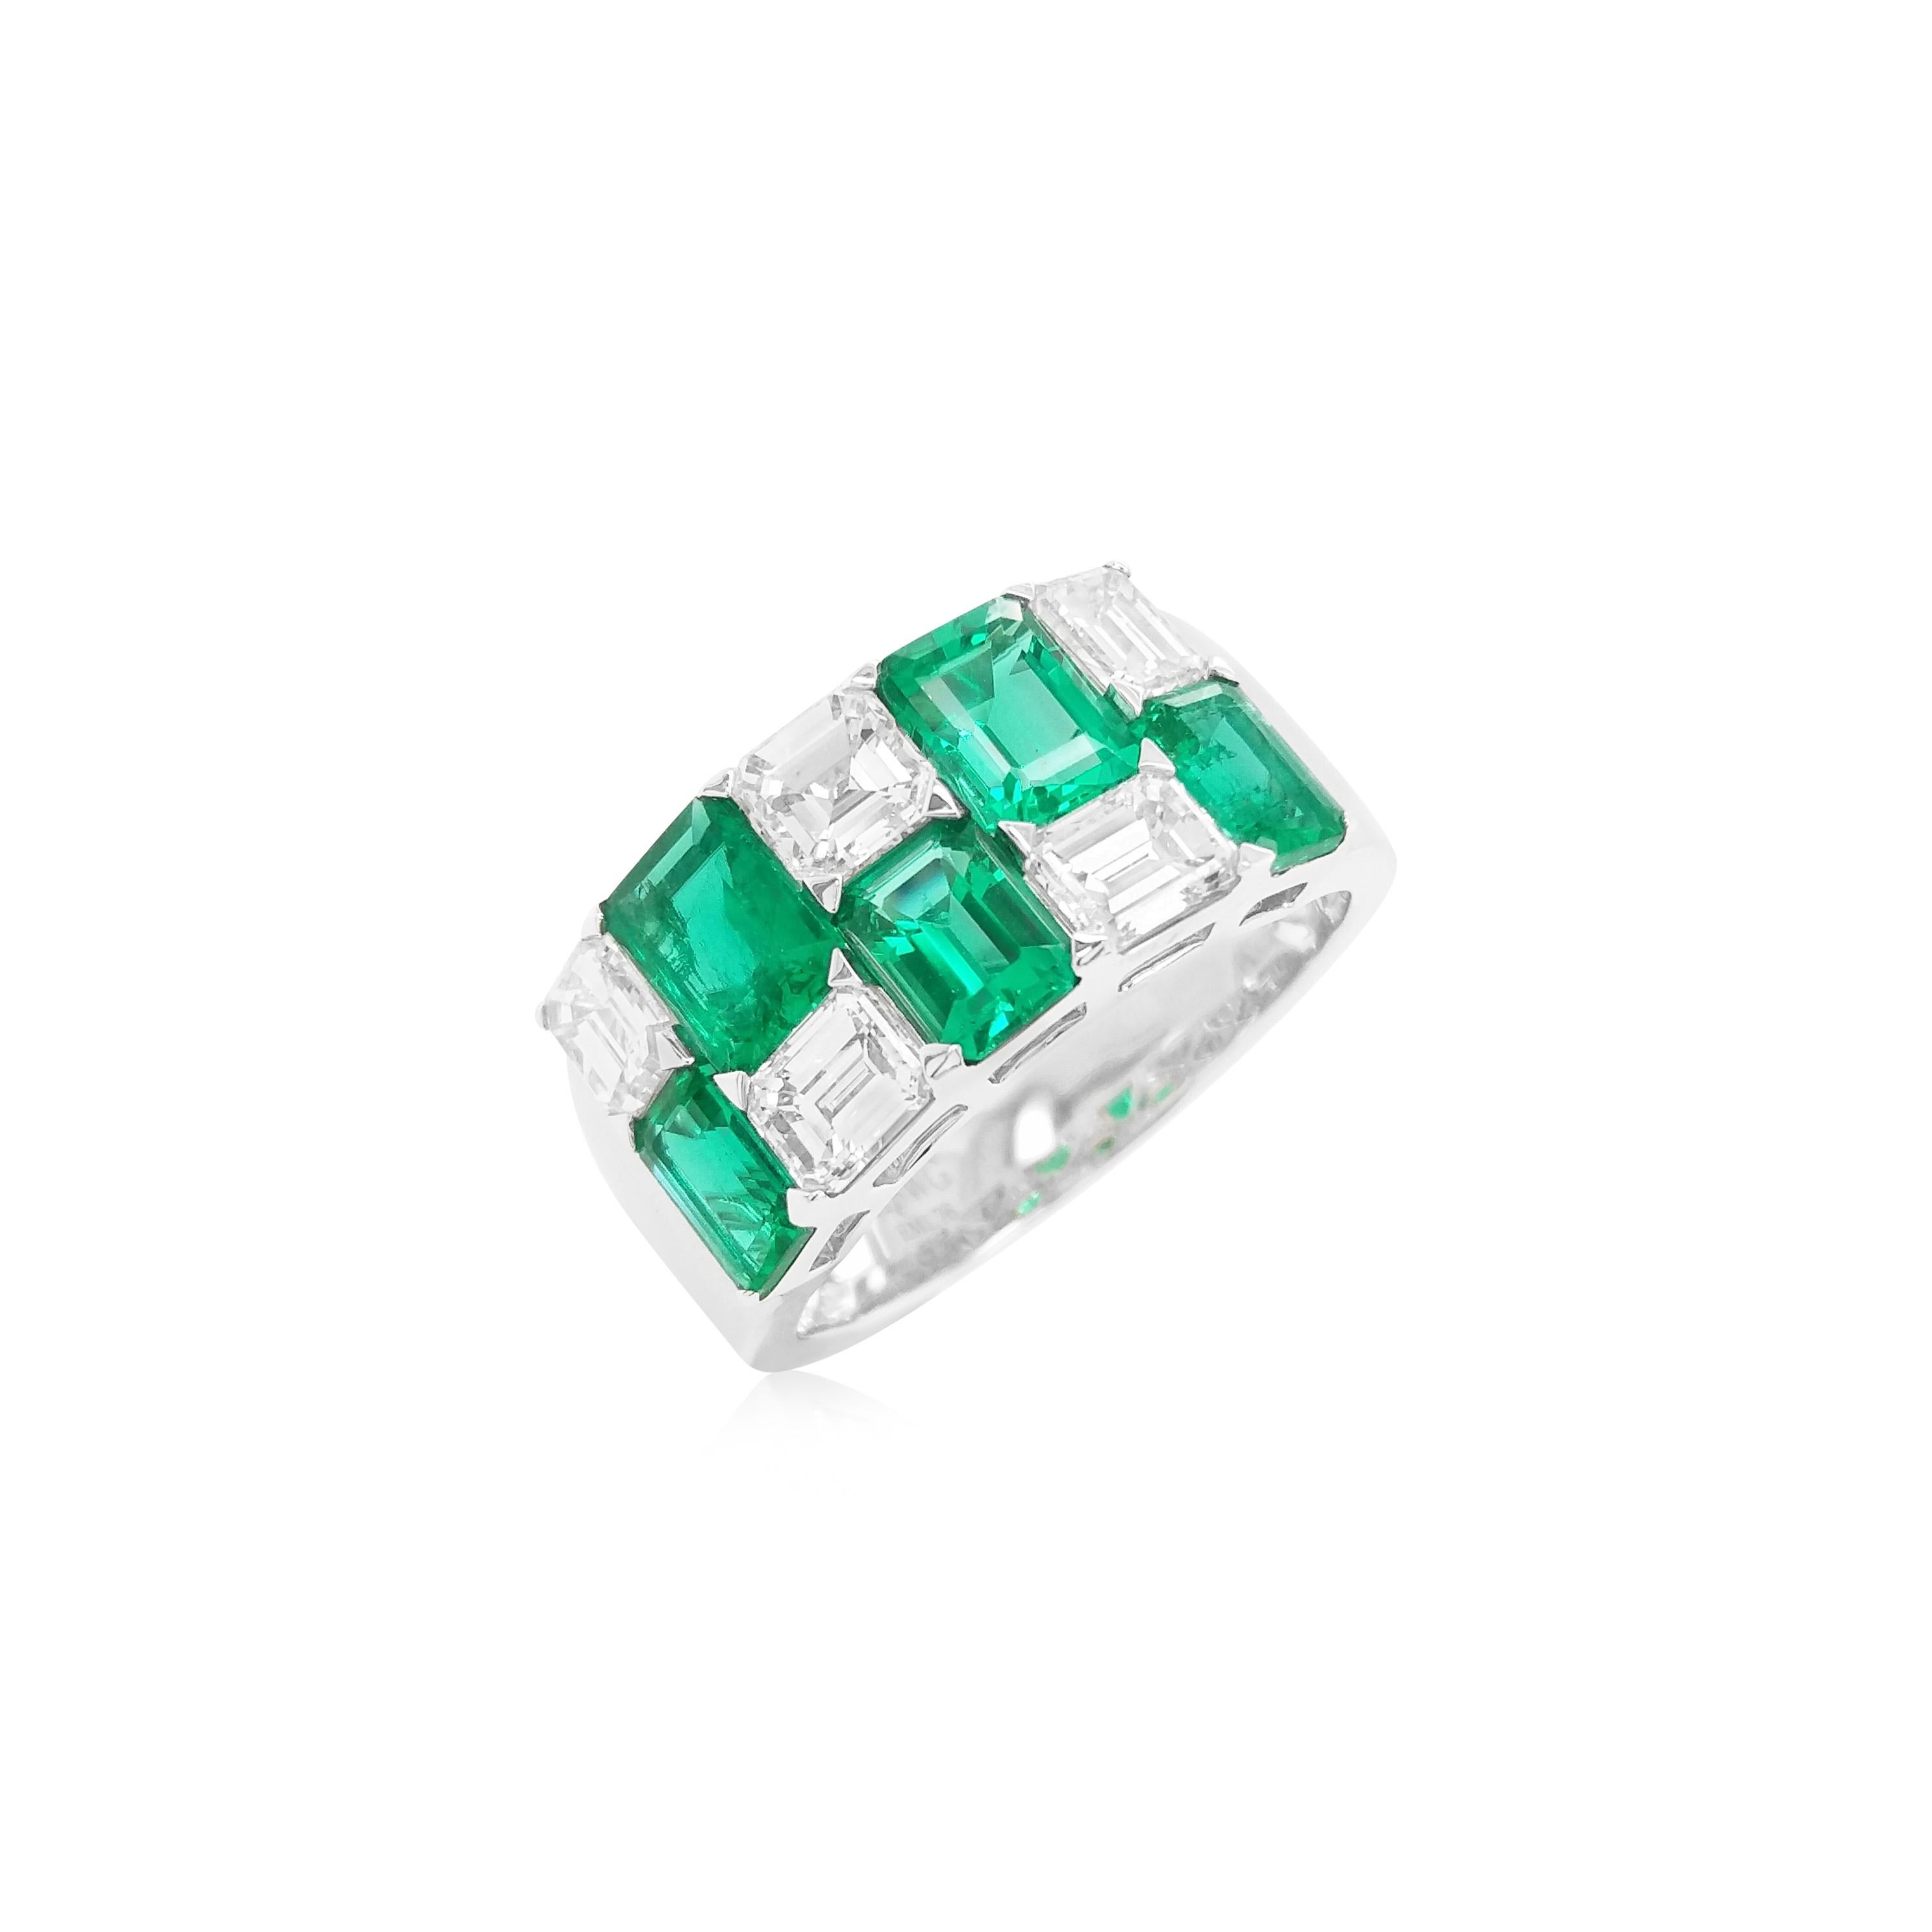 Emerald Cut Certified Colombian Emerald White Diamond 18K Gold Cocktail Ring For Sale